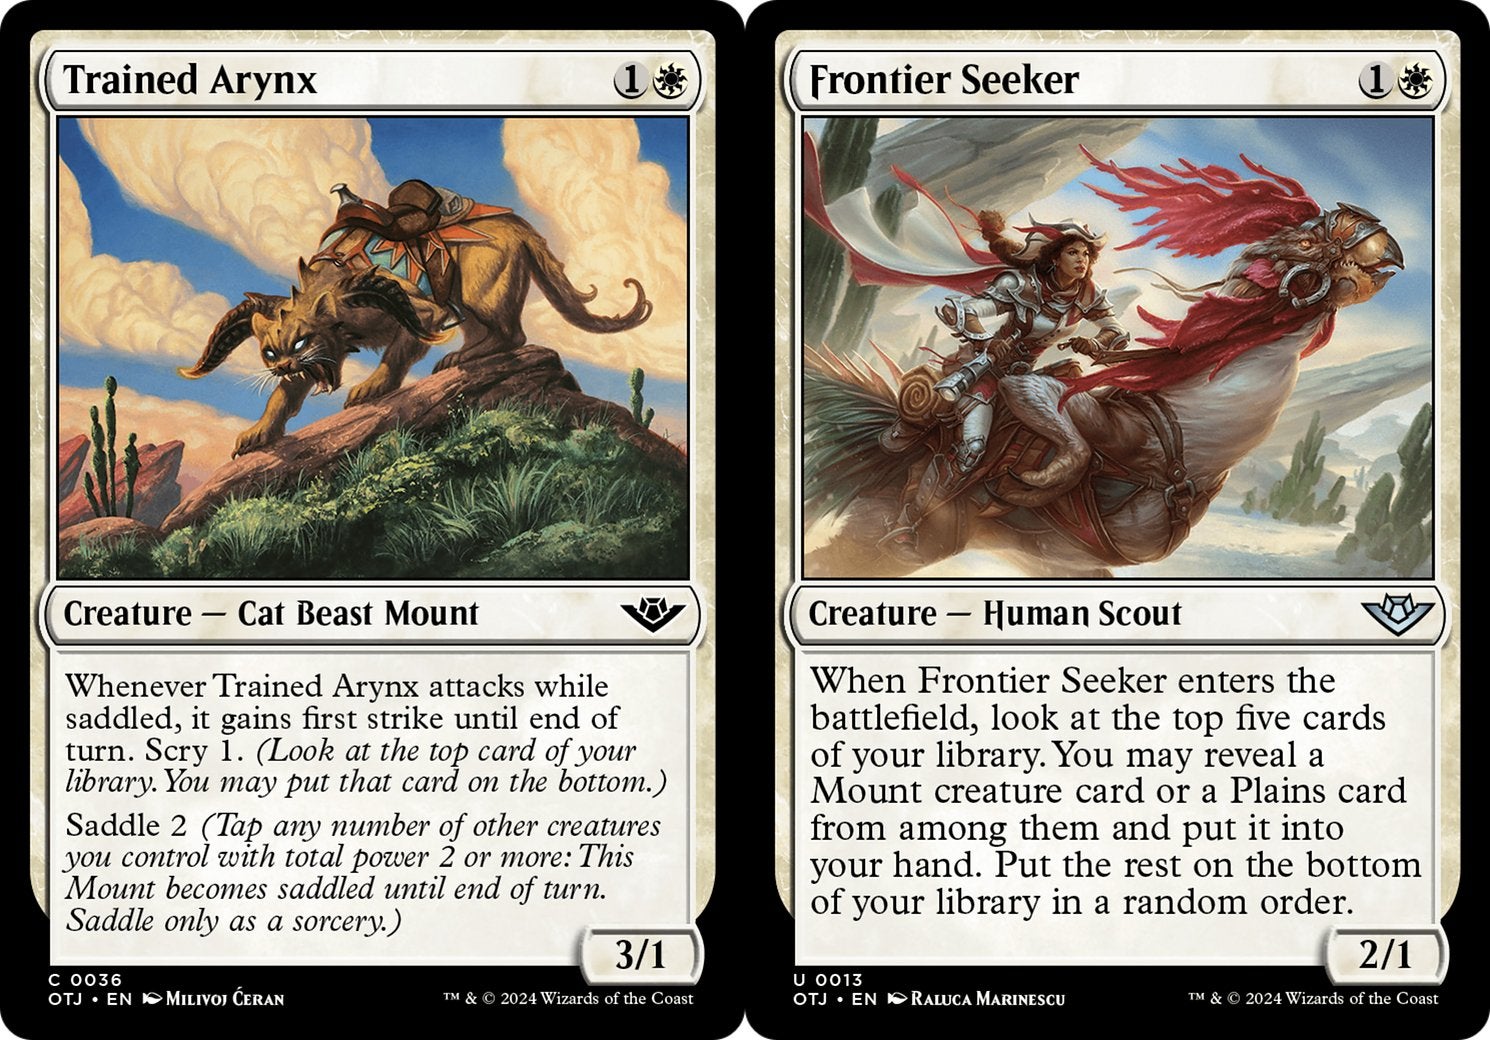 Trained Arynx, a mount with the Saddle ability, and Frontier Seeker from MTG.